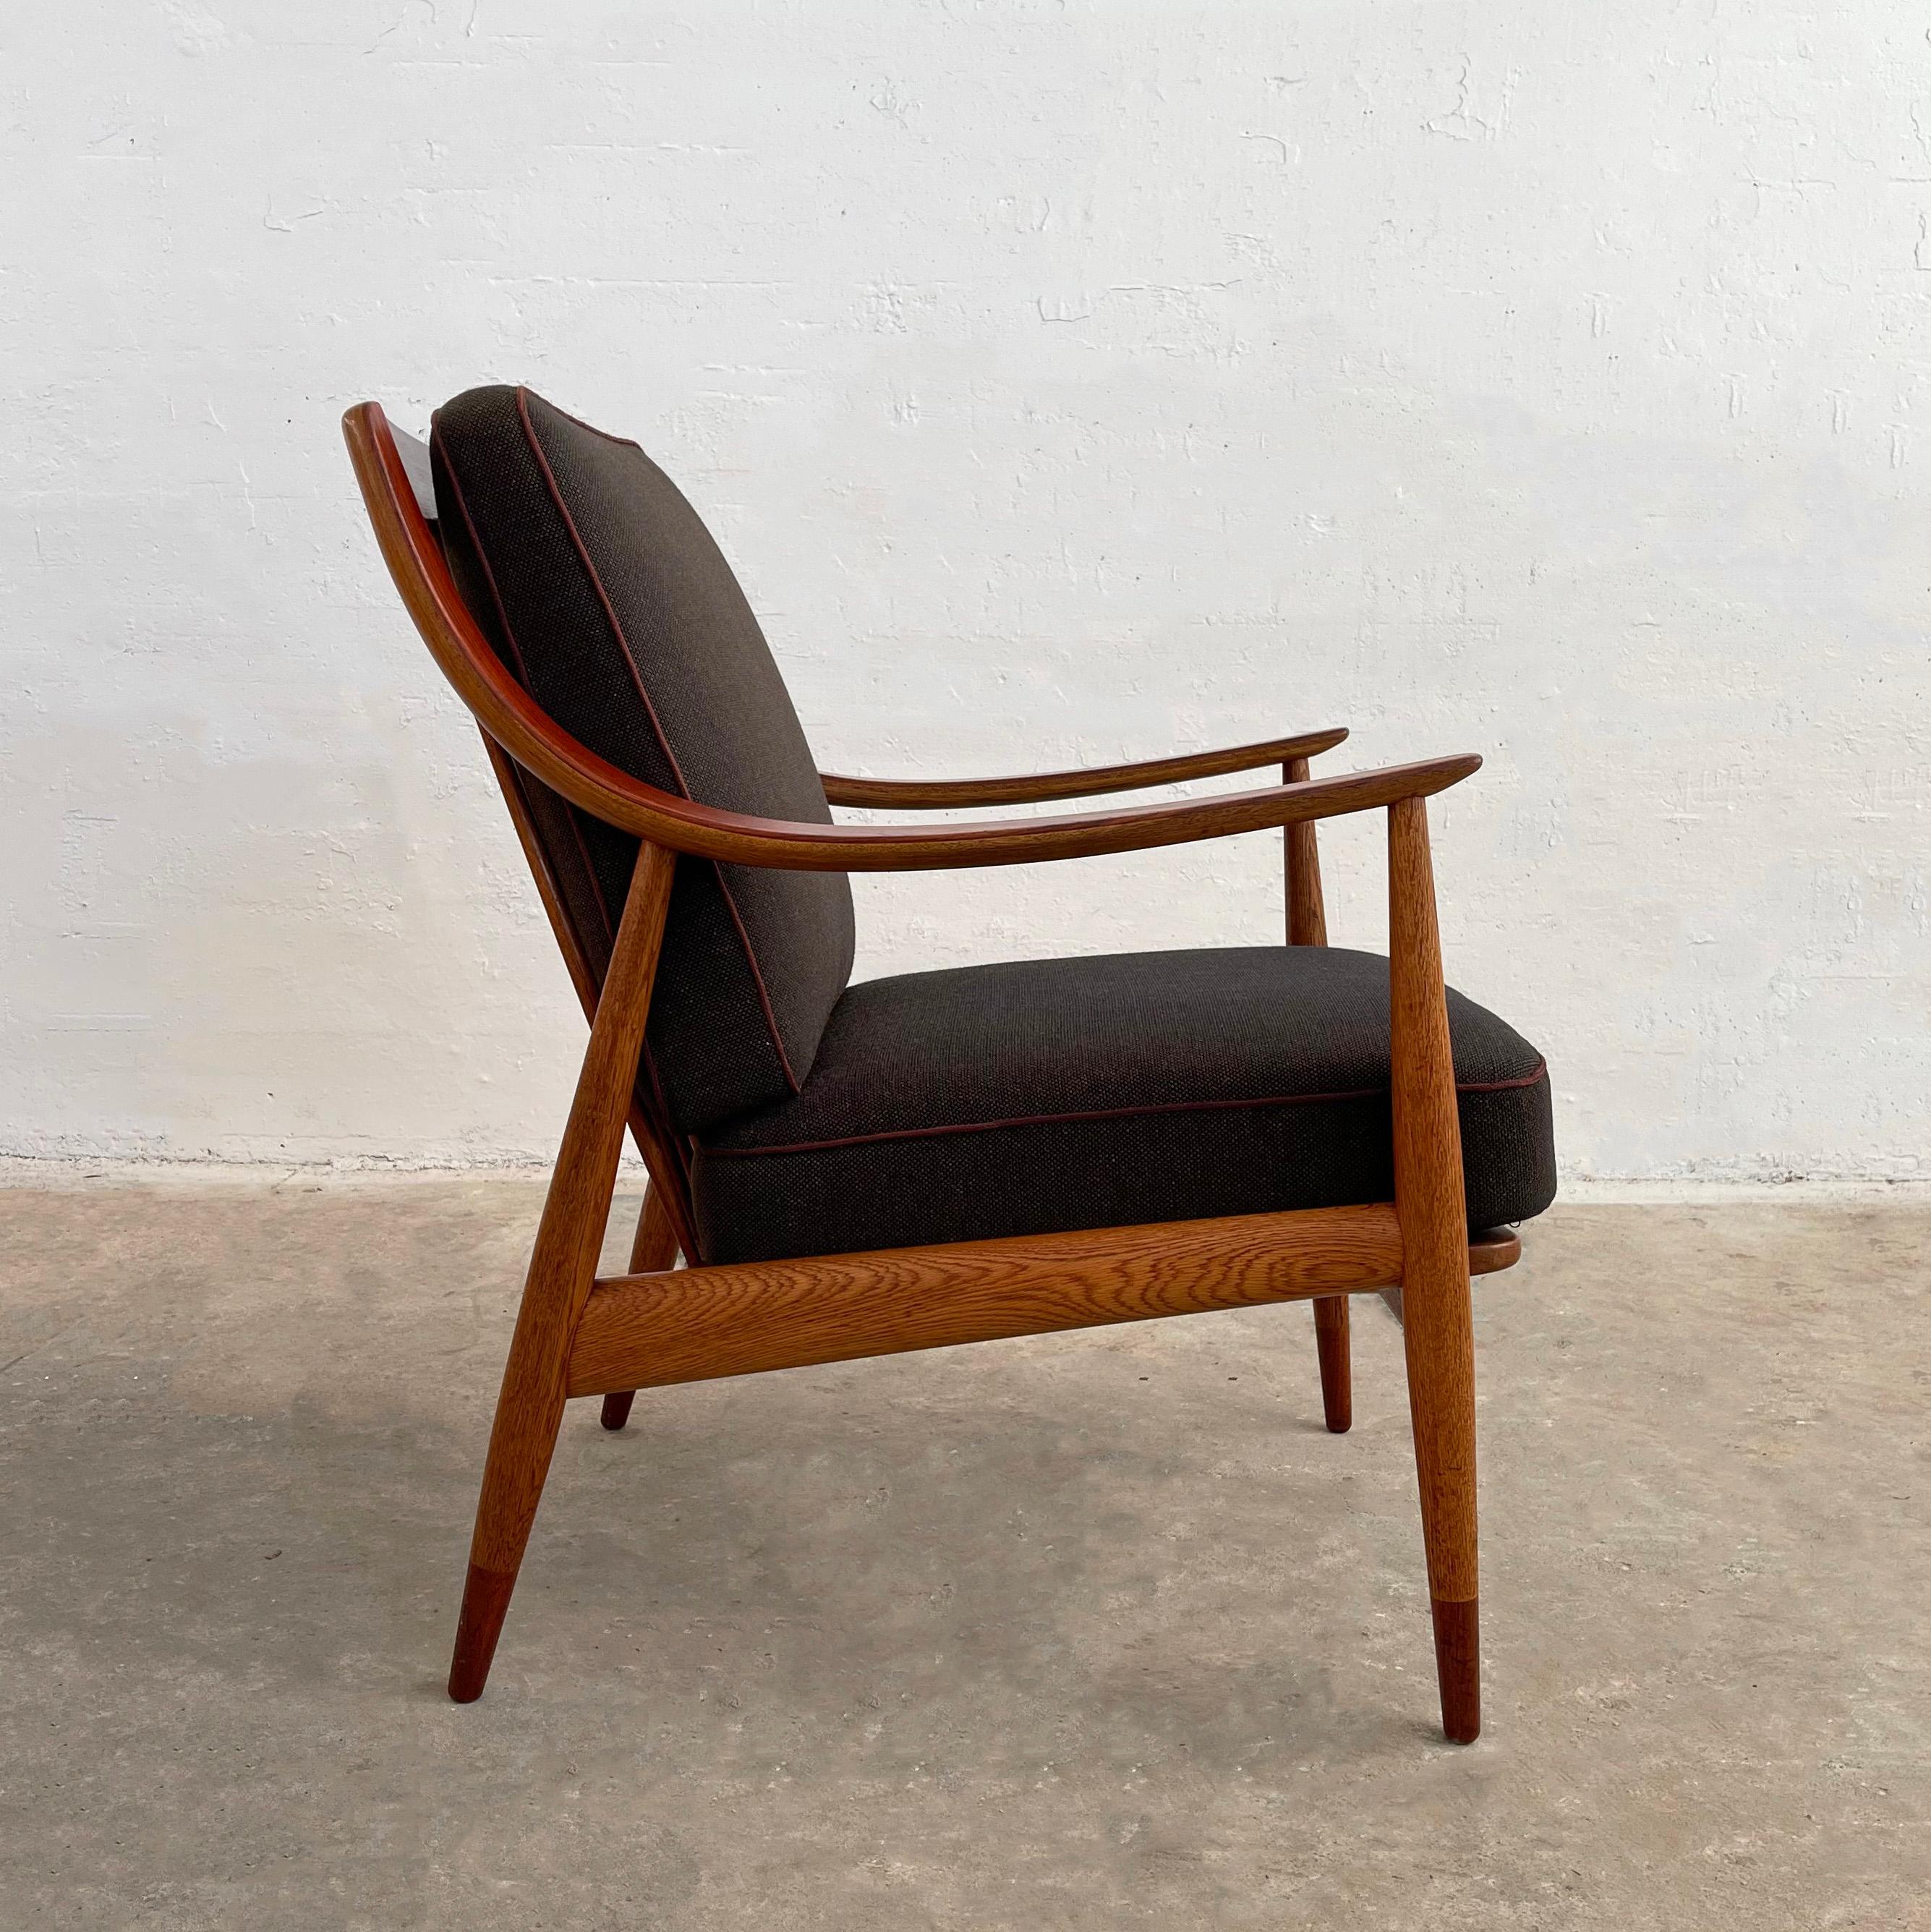 Scandinavian Modern Scoop Lounge Chair By Peter Hvidt And Orla Molgaard-Nielsen In Good Condition For Sale In Brooklyn, NY